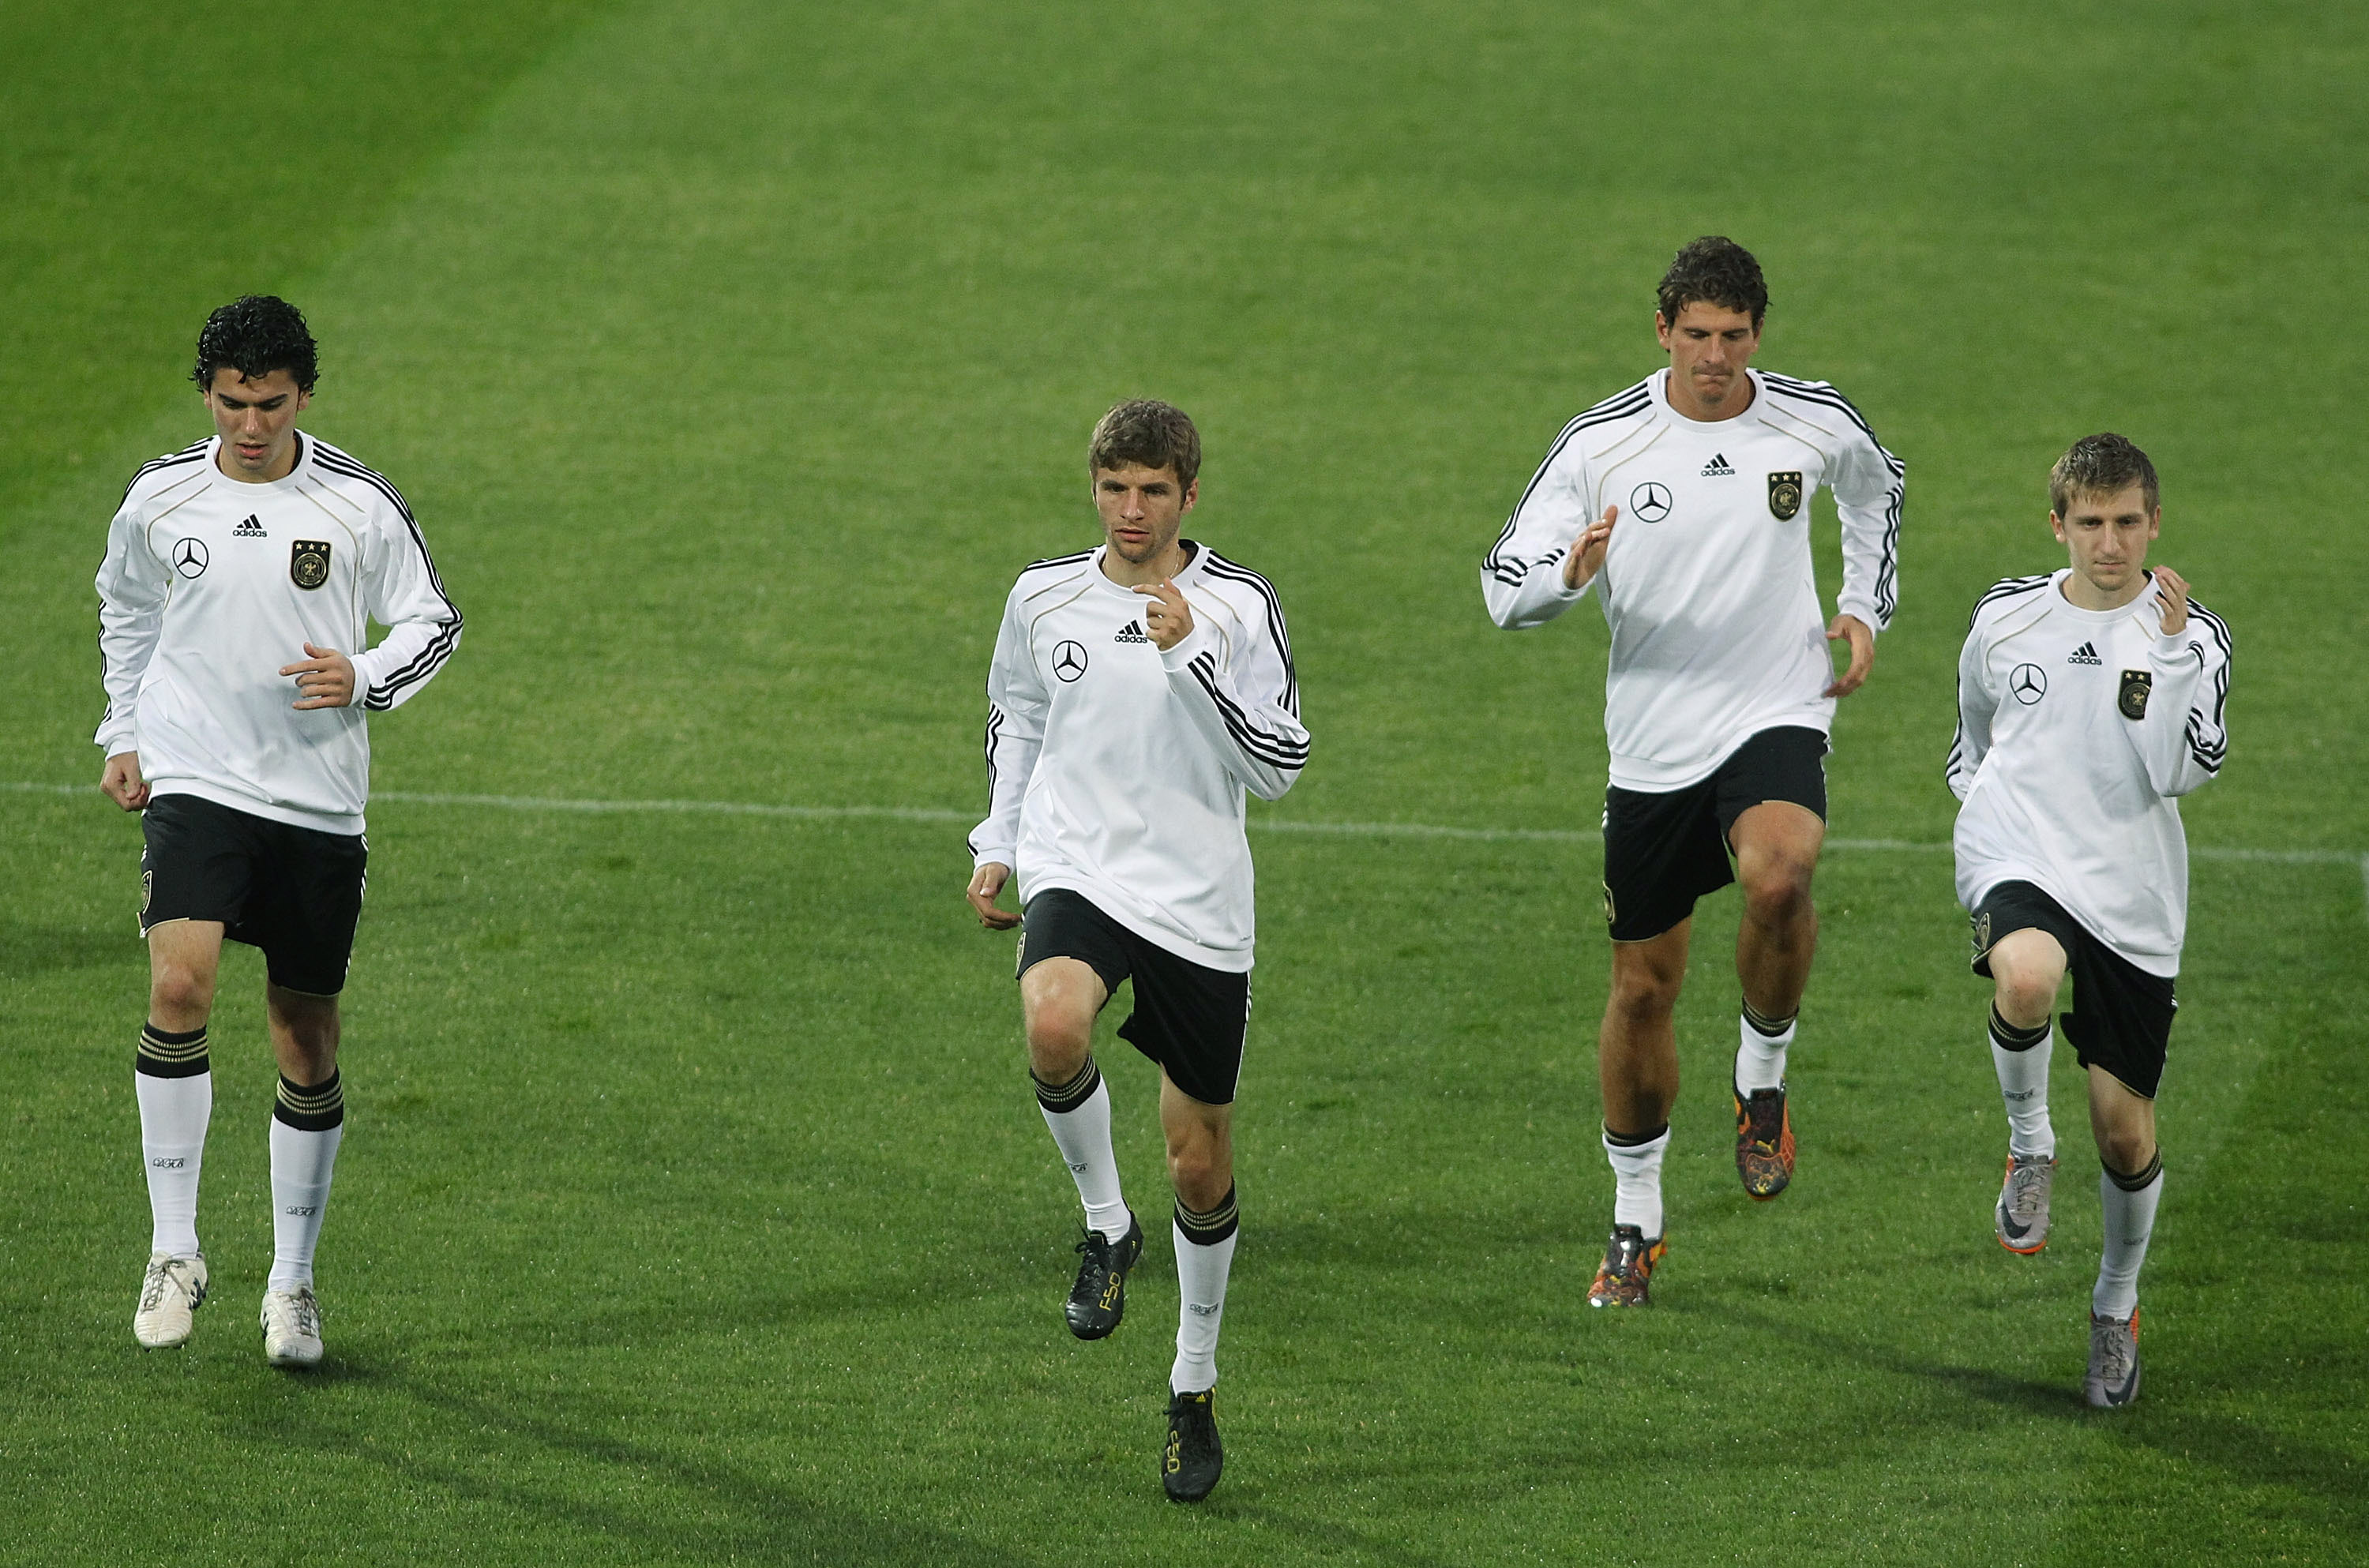 PRETORIA, SOUTH AFRICA - JULY 05:  Players of Germany exercise during a training session at Super stadium on July 5, 2010 in Pretoria, South Africa.  (Photo by Joern Pollex/Getty Images)